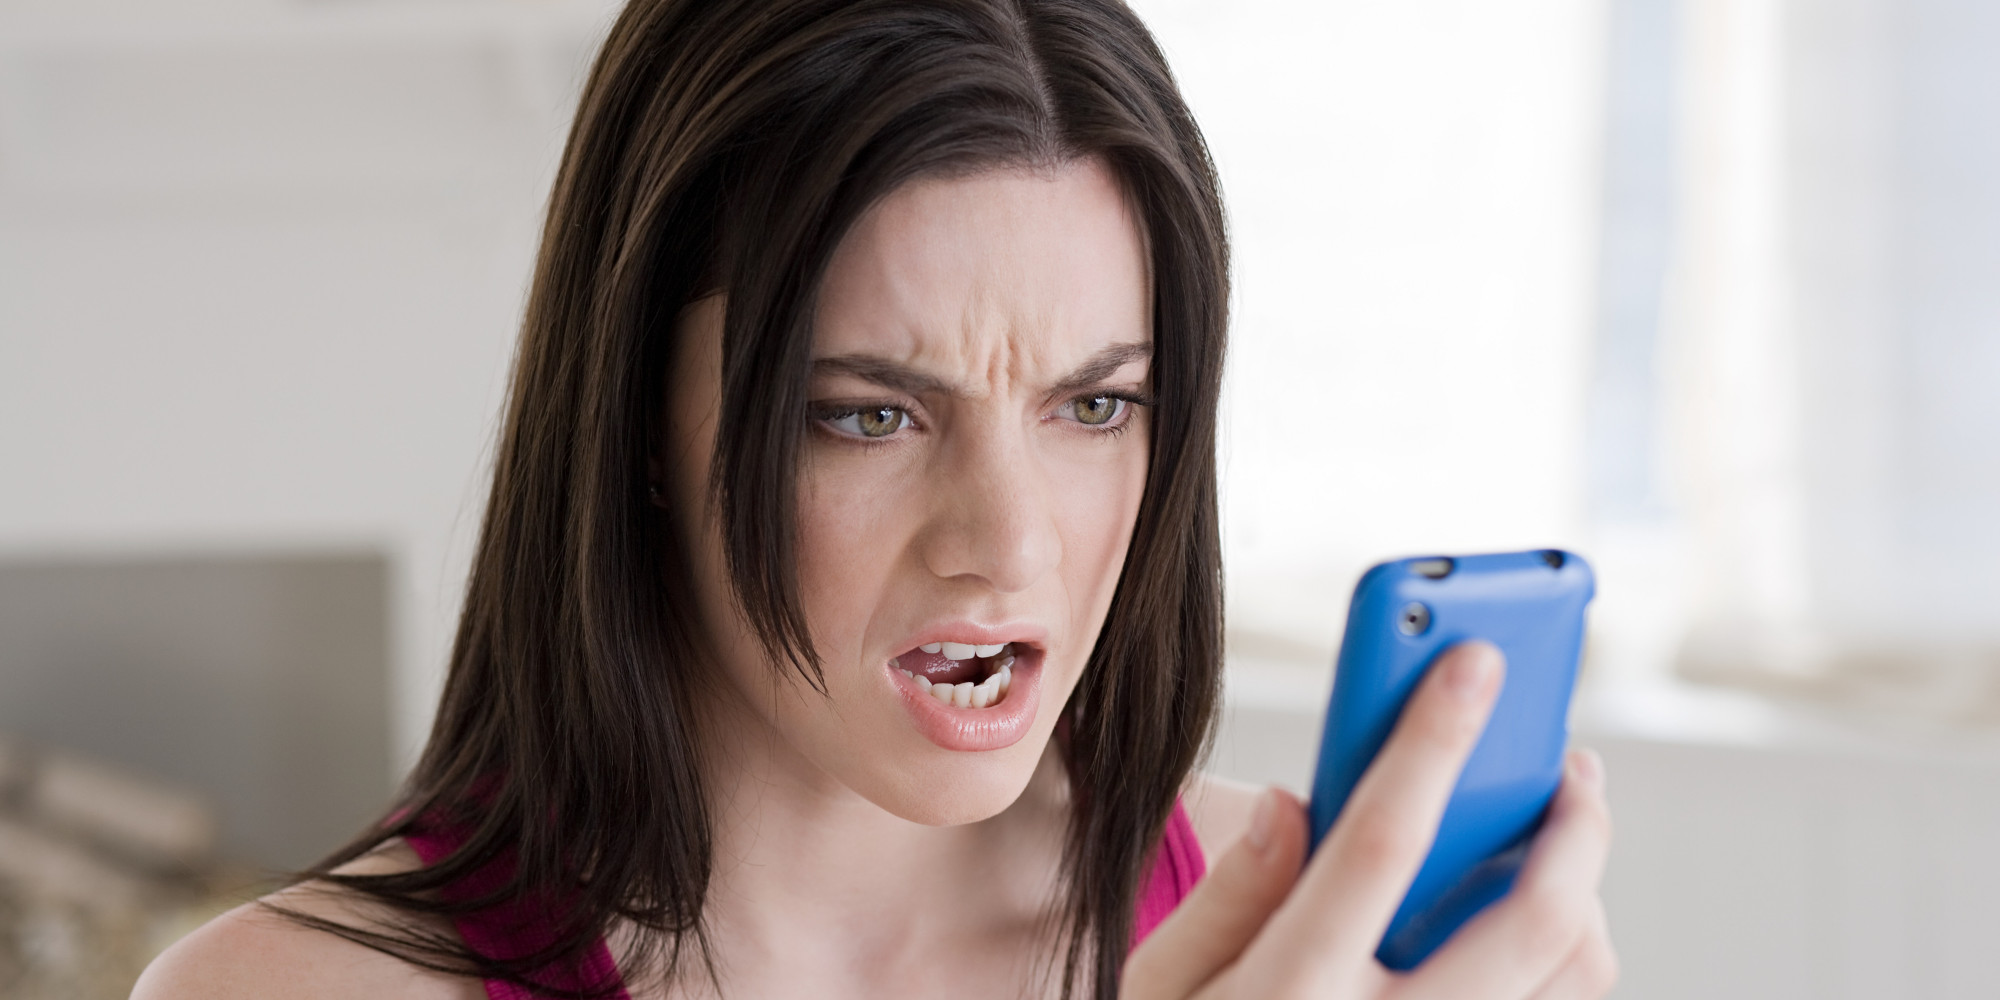 📱 Reply to These Texts and We’ll Tell You What Your Friends Think of You Angry woman looking at cellphone